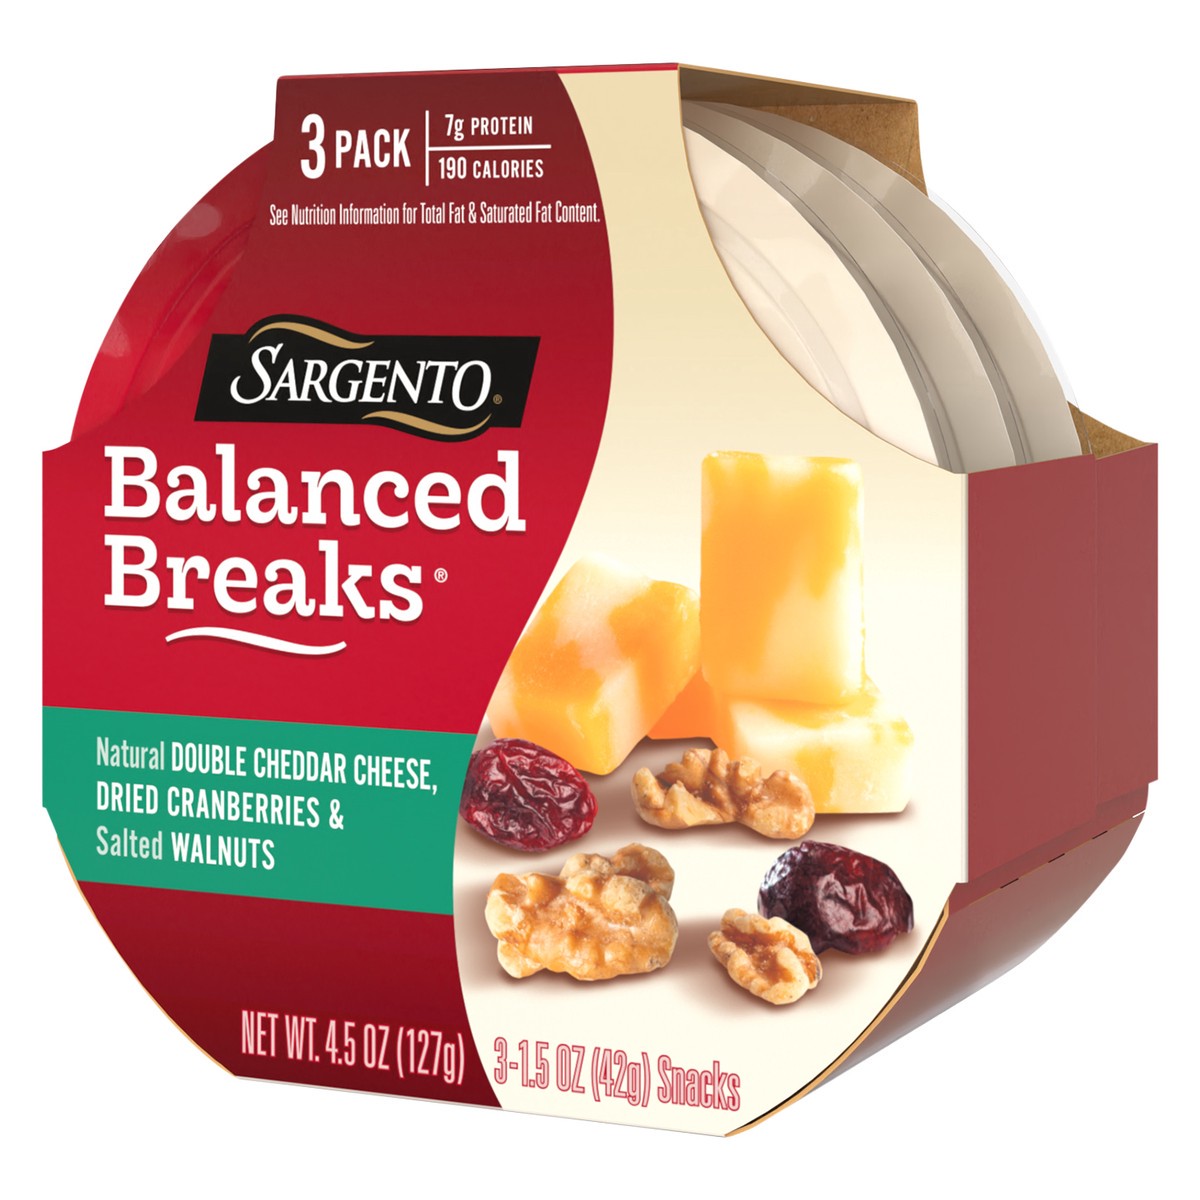 slide 7 of 14, Sargento Balanced Breaks with Natural Double Cheddar Cheese, Dried Cranberries and Salted Walnuts, 1.5 oz., 3-Pack, 4.5 oz